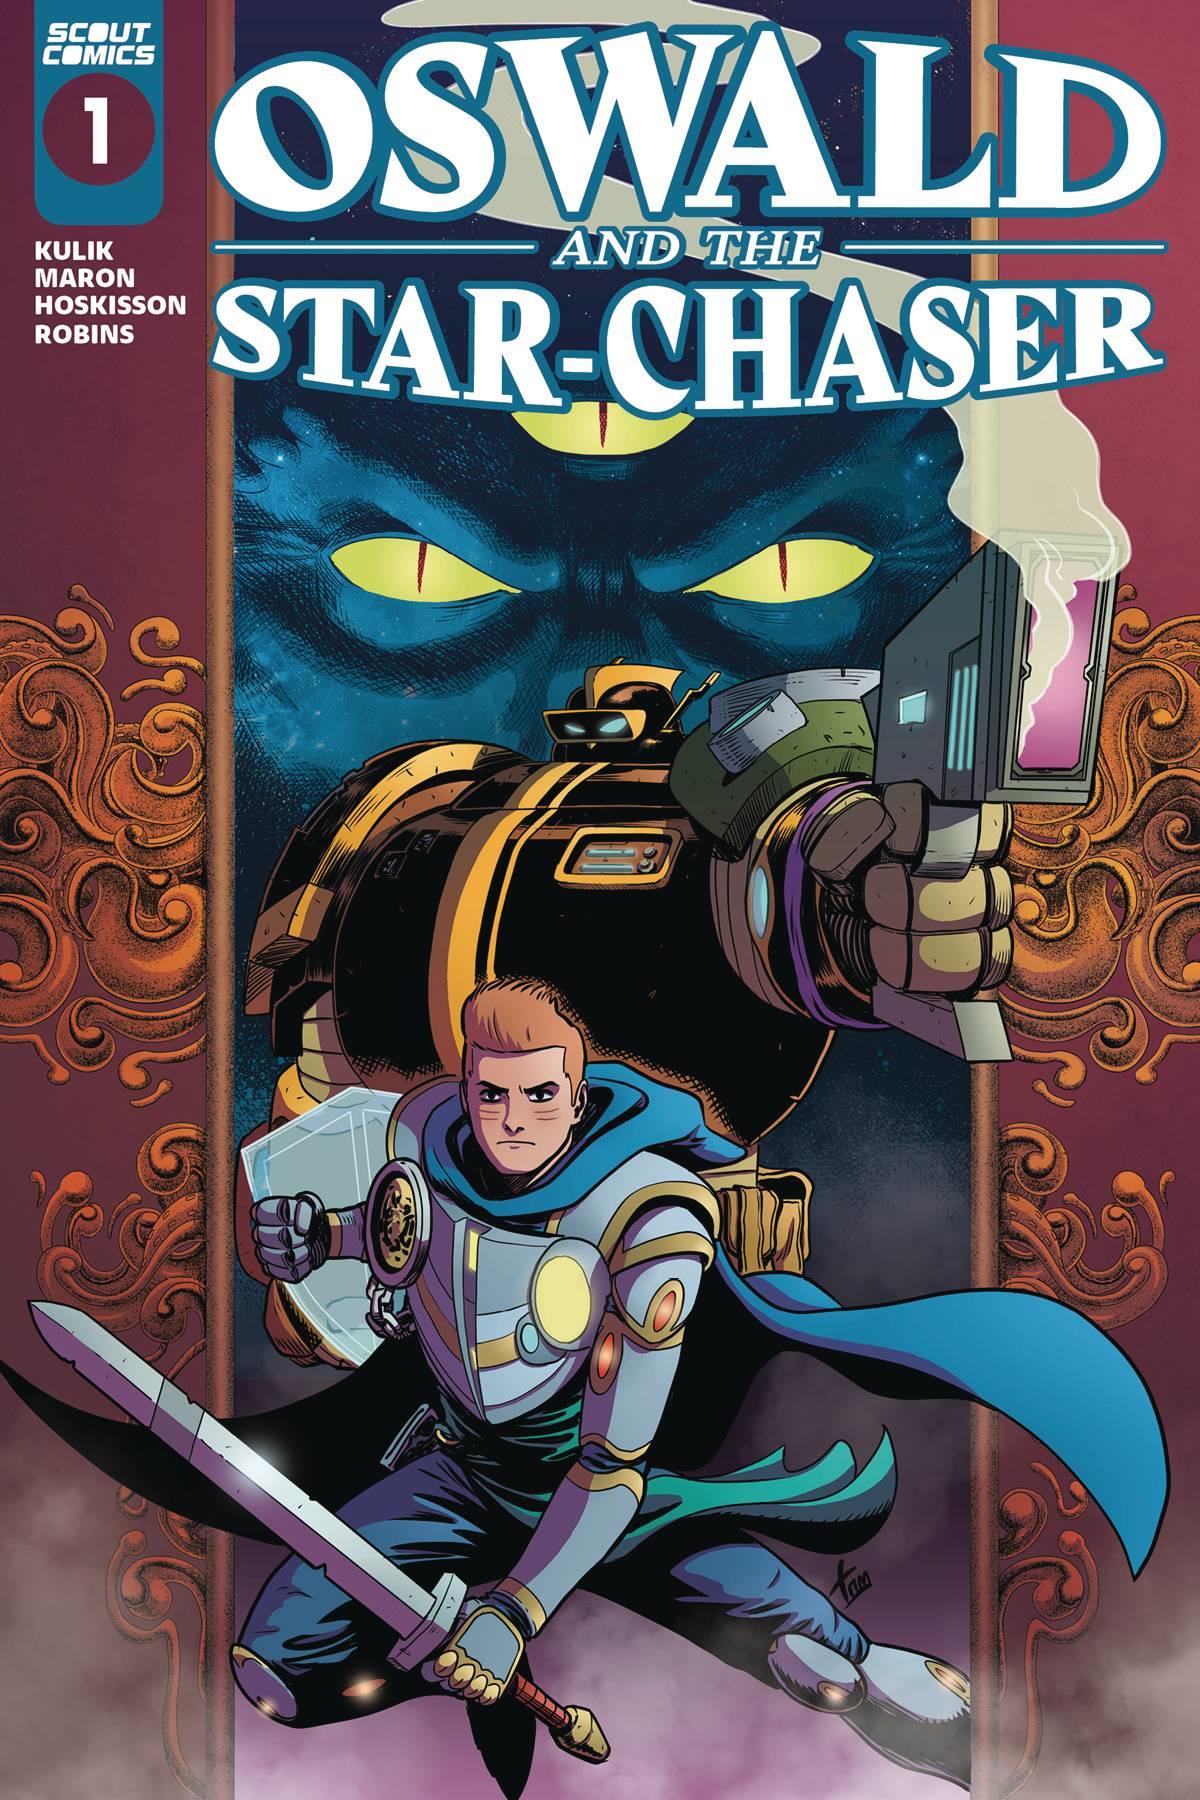 Oswald & Star Chaser #1 (of 6) Cvr A Tom Hoskisson Scout Comics Comic Book